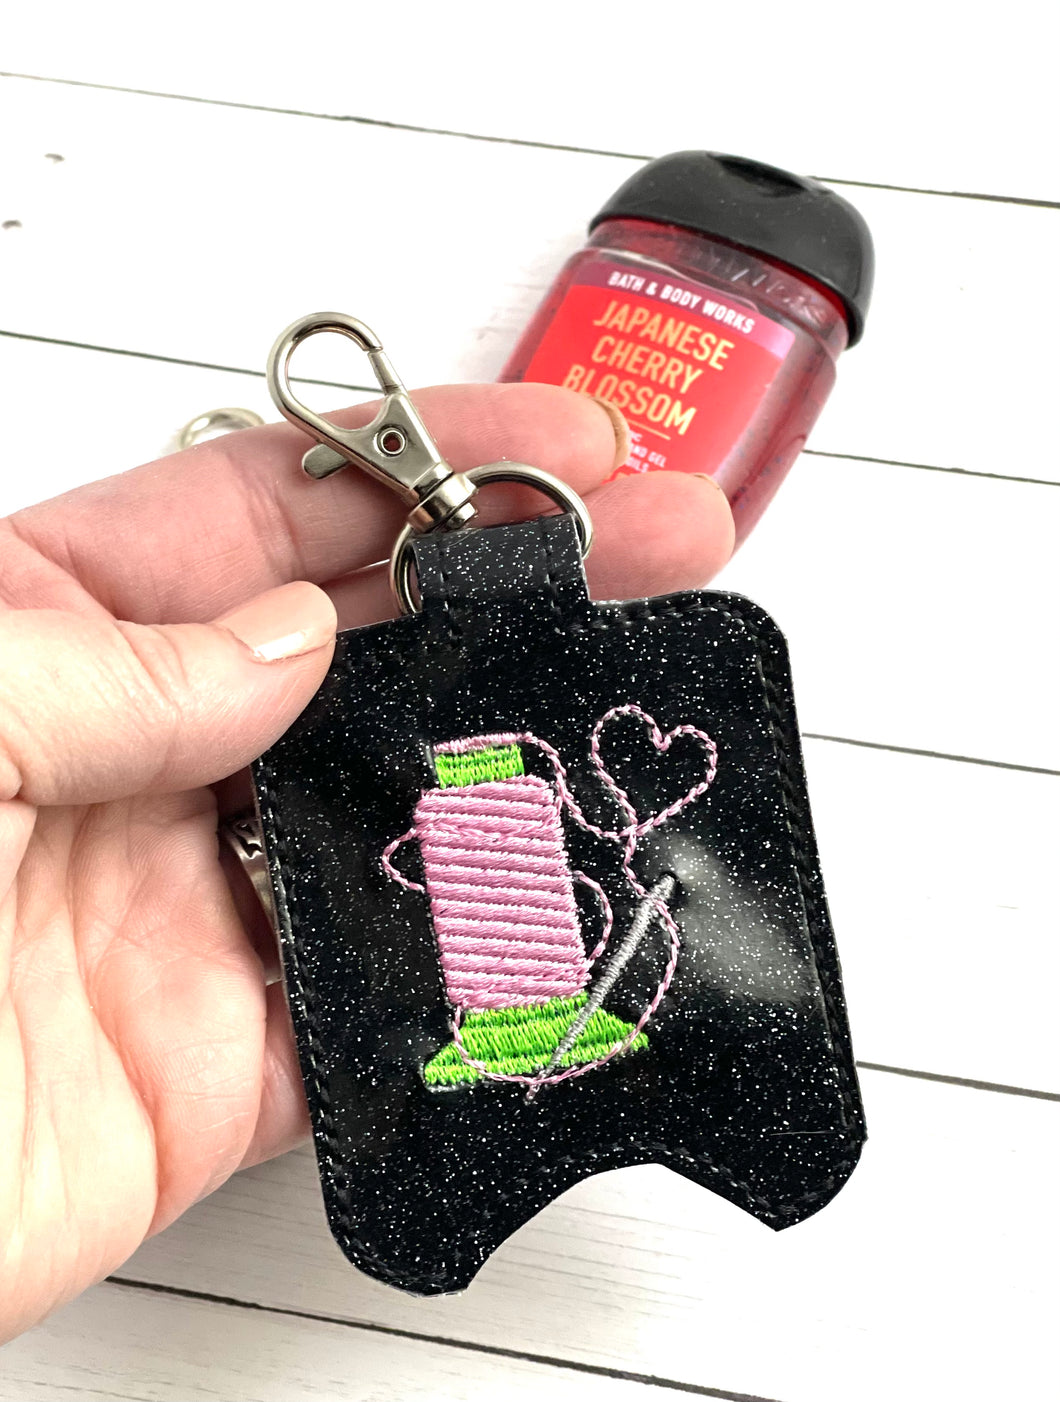 Sewing Love Hand Sanitizer Holder Snap Tab Version In the Hoop Embroidery Project 1 oz BBW for 5x7 hoops